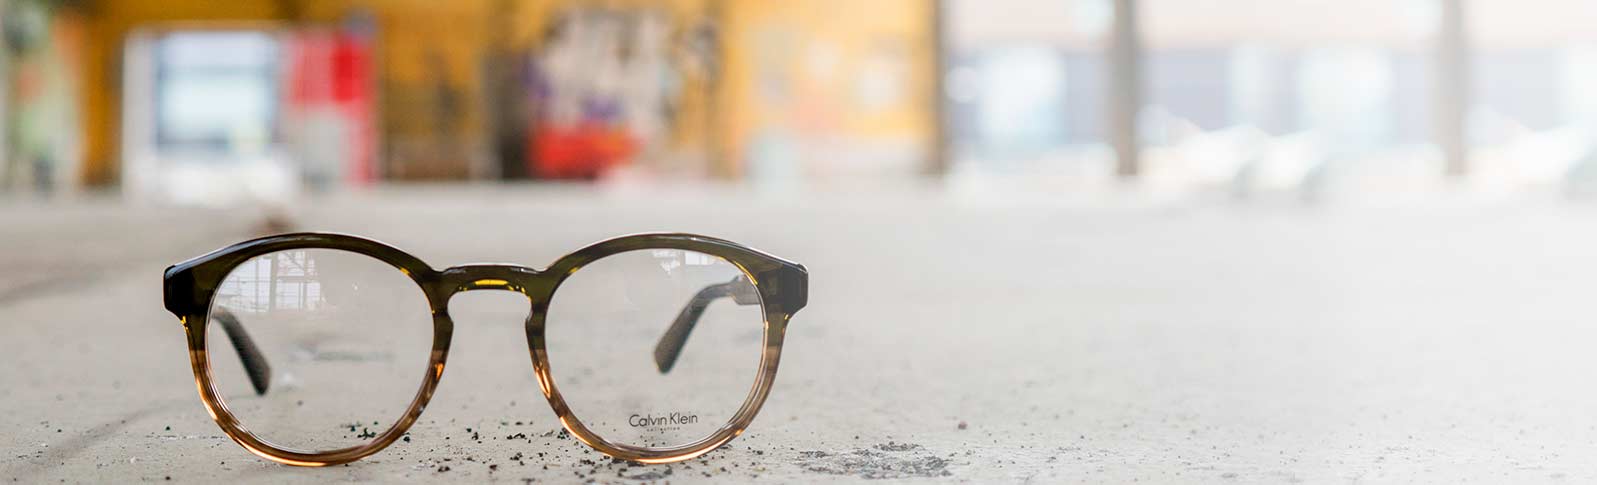 glasses from calvin klein in an industrial environment